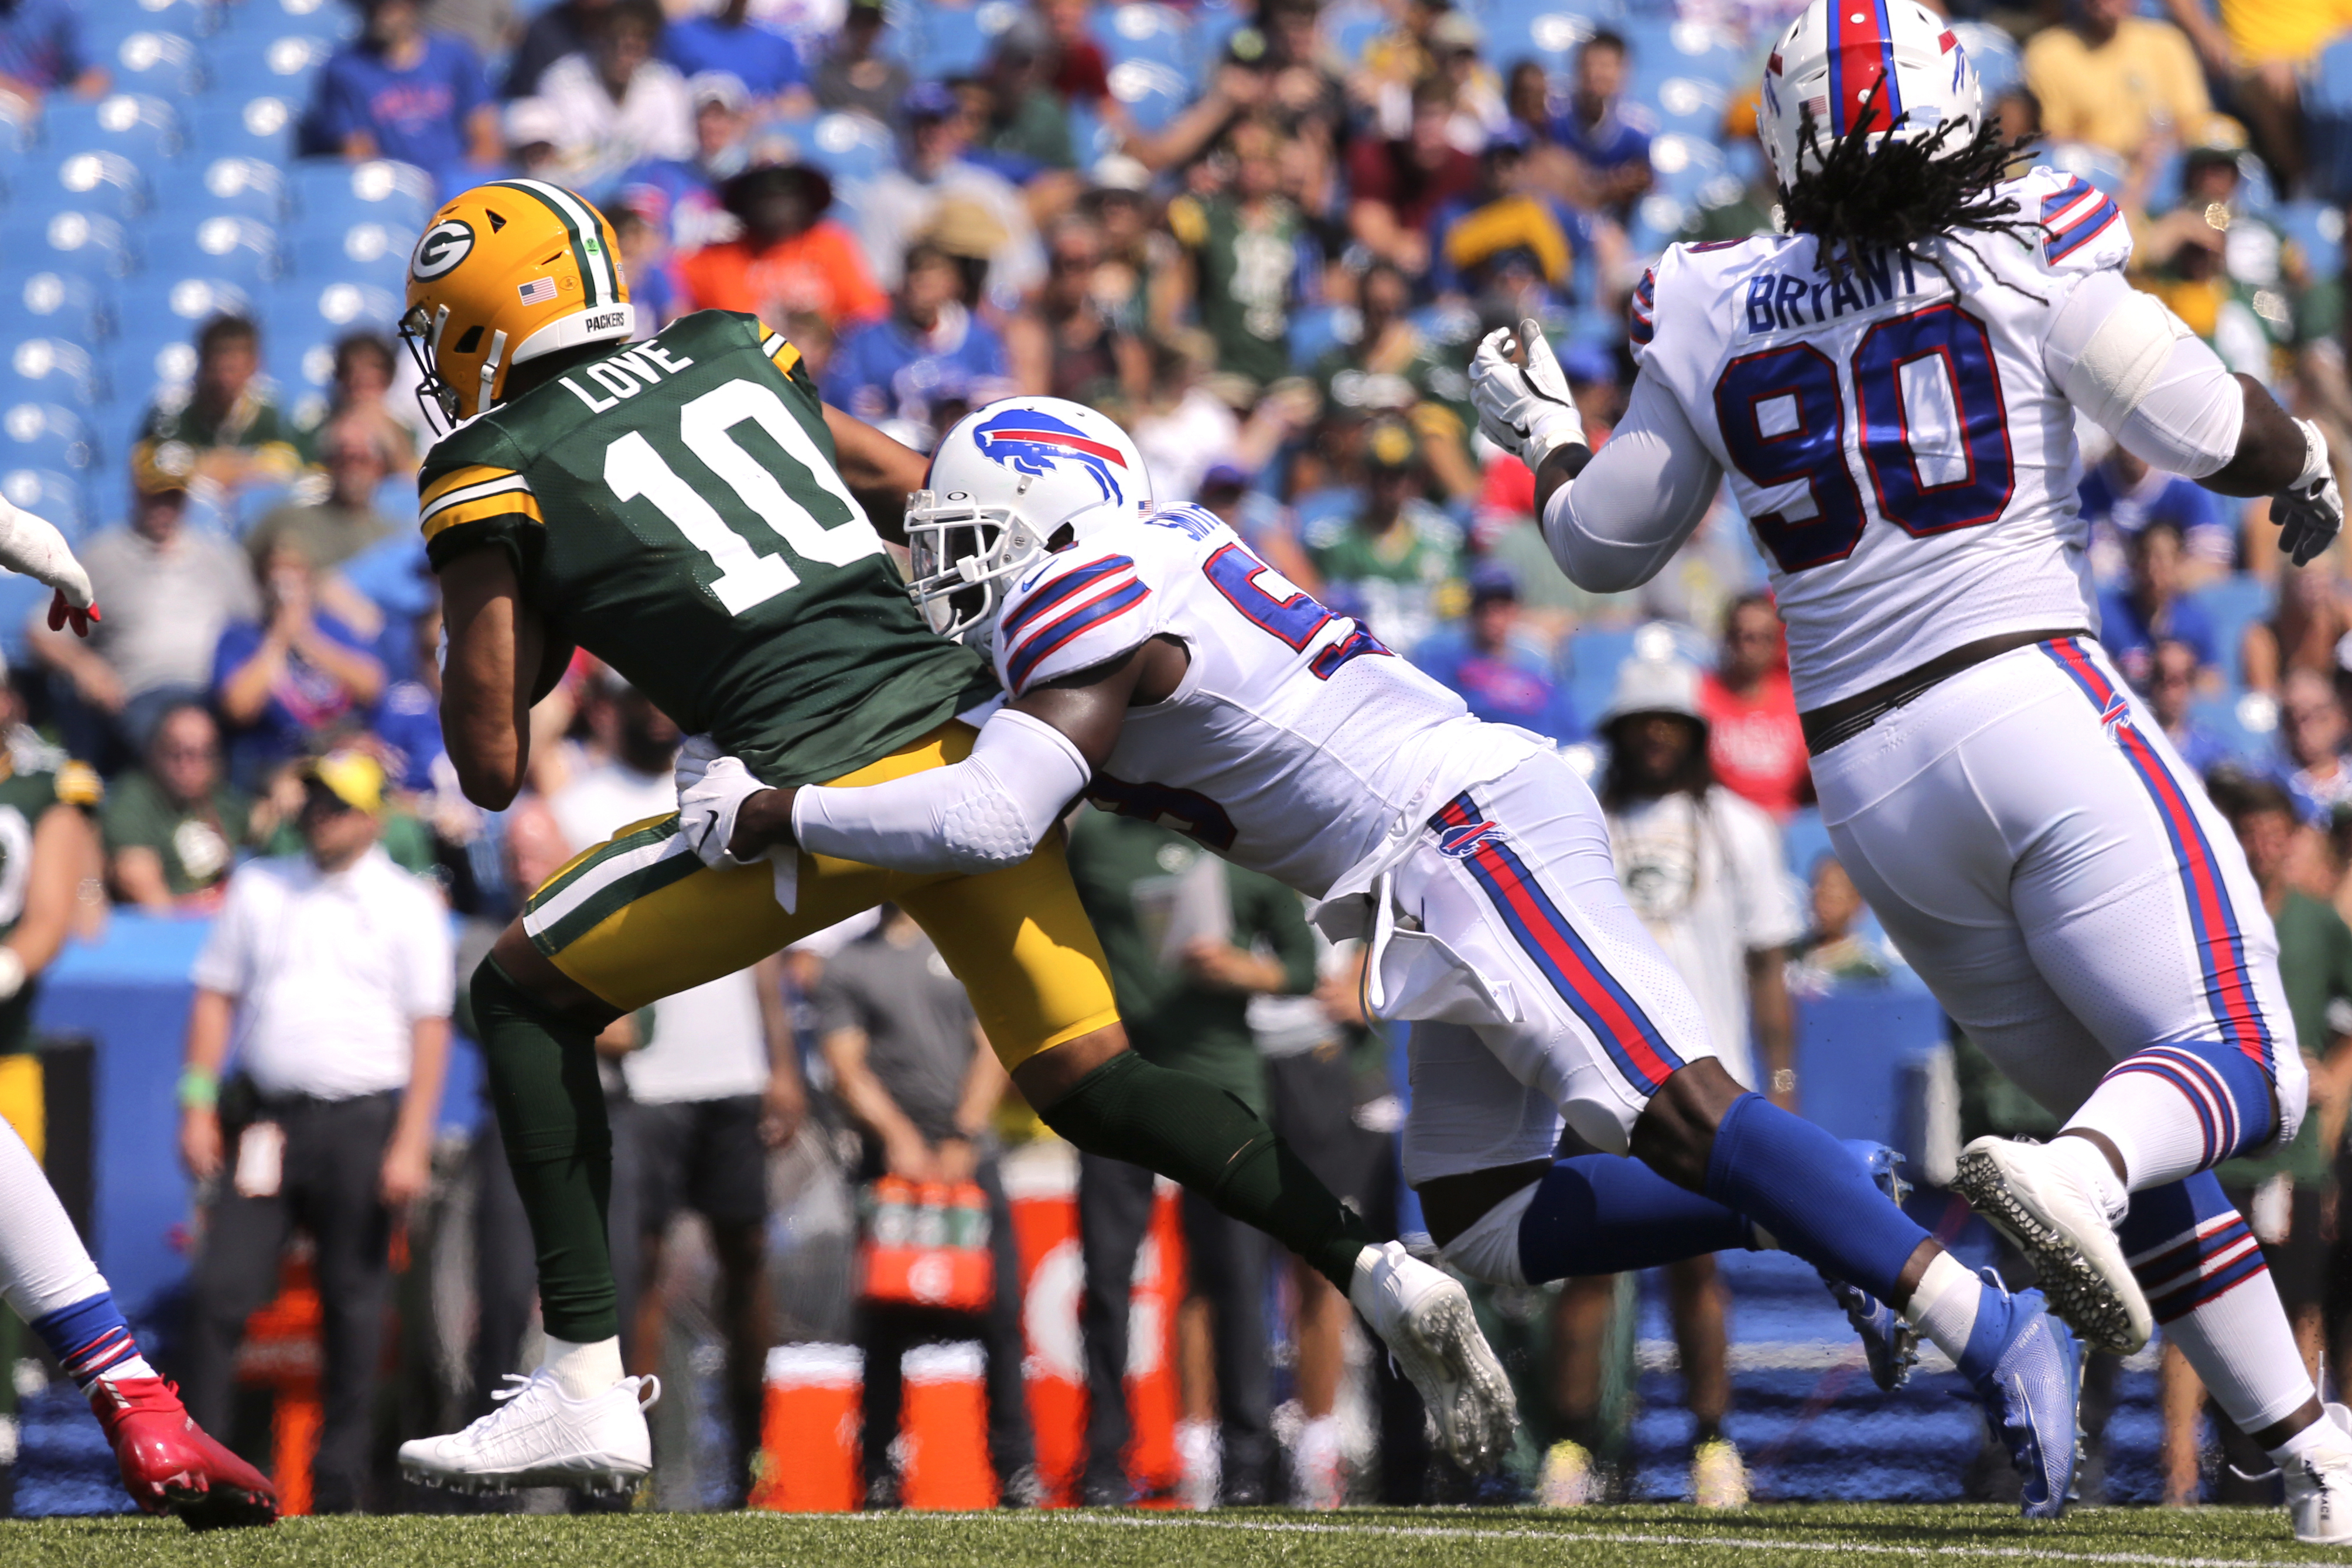 Buffalo Bills safety Jordan Poyer ruled out for Sunday's game against Miami